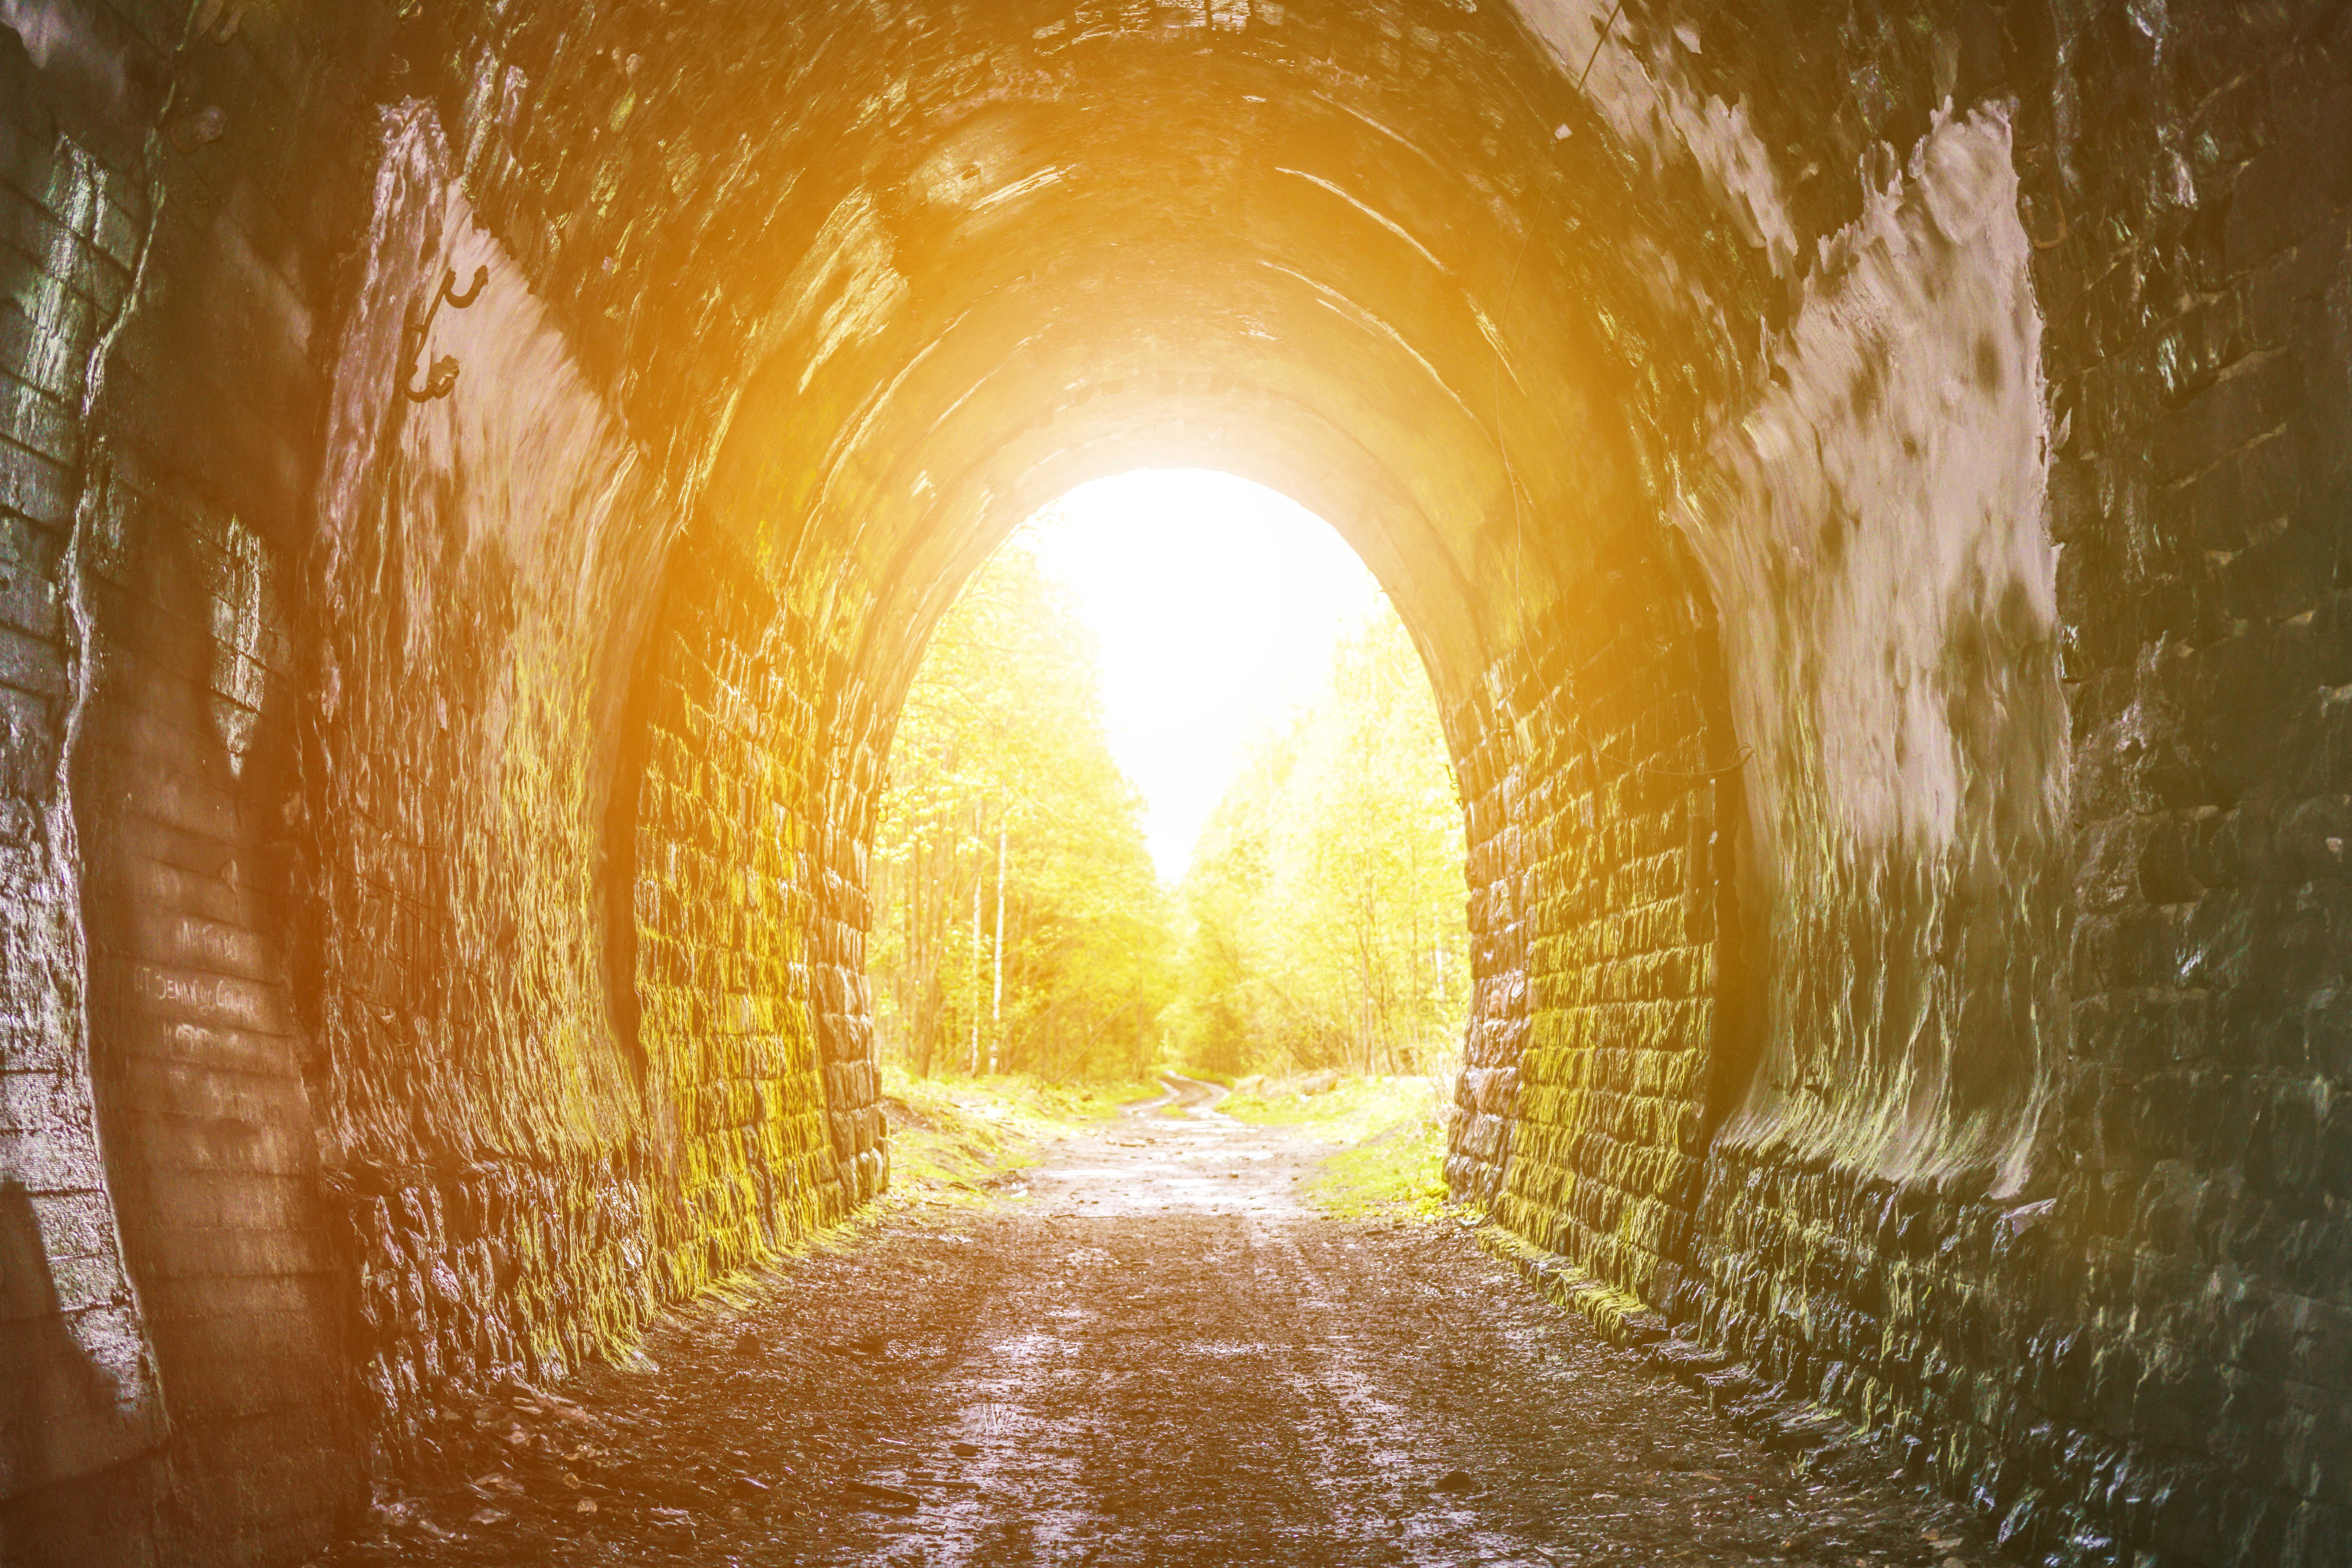 Exit,from,the,old,tunnel,,no,sun,glare,sunset.